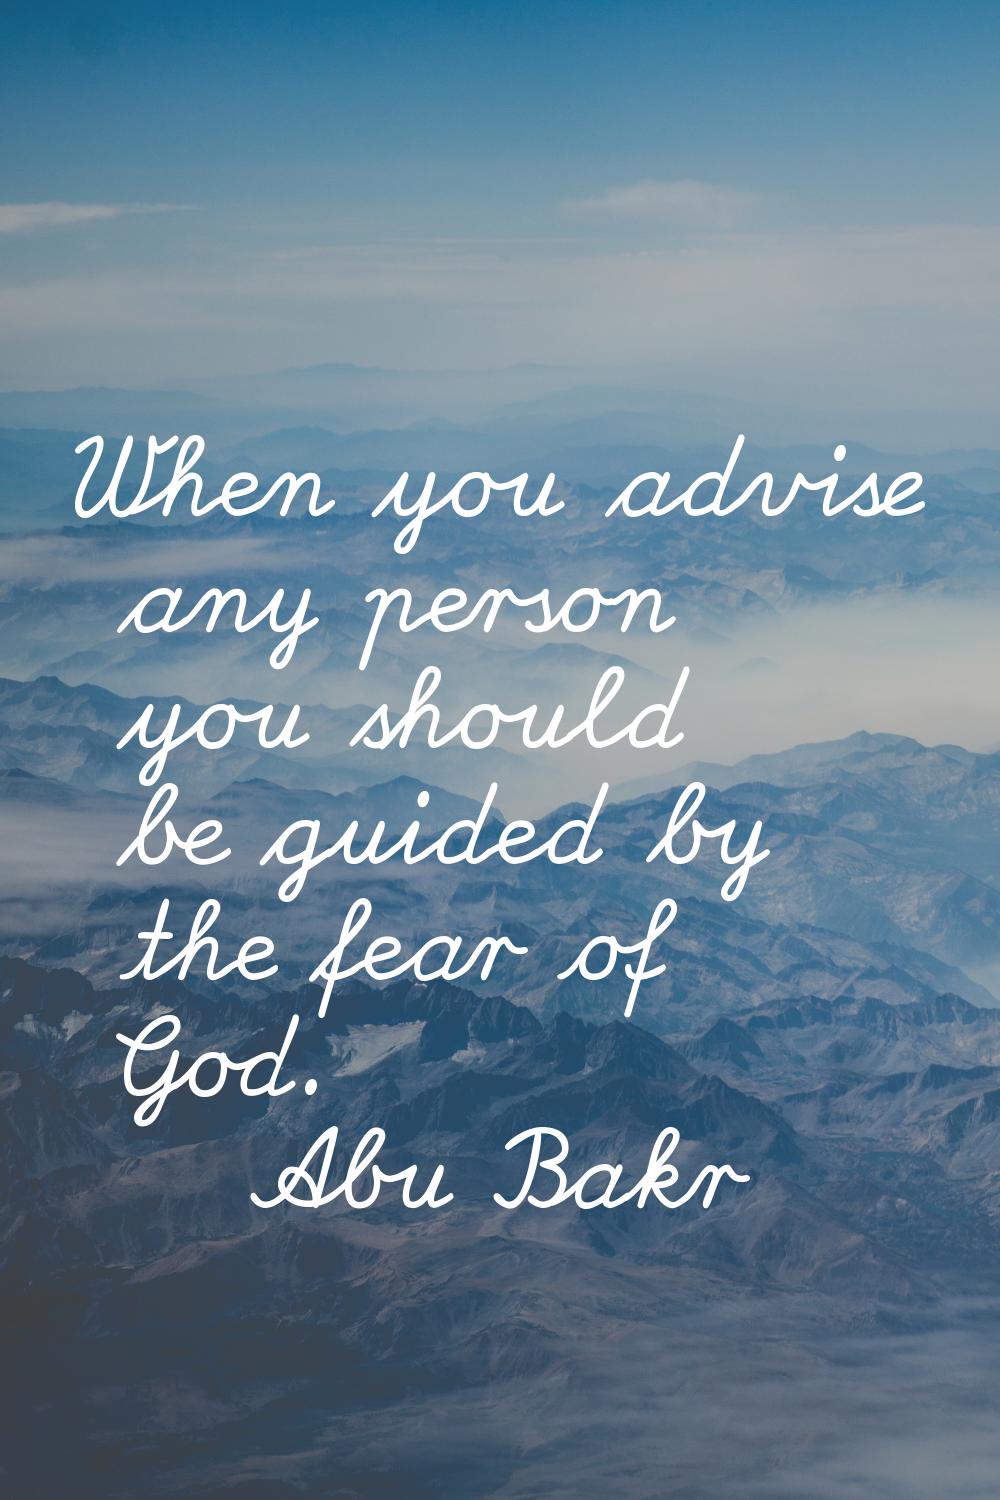 When you advise any person you should be guided by the fear of God.